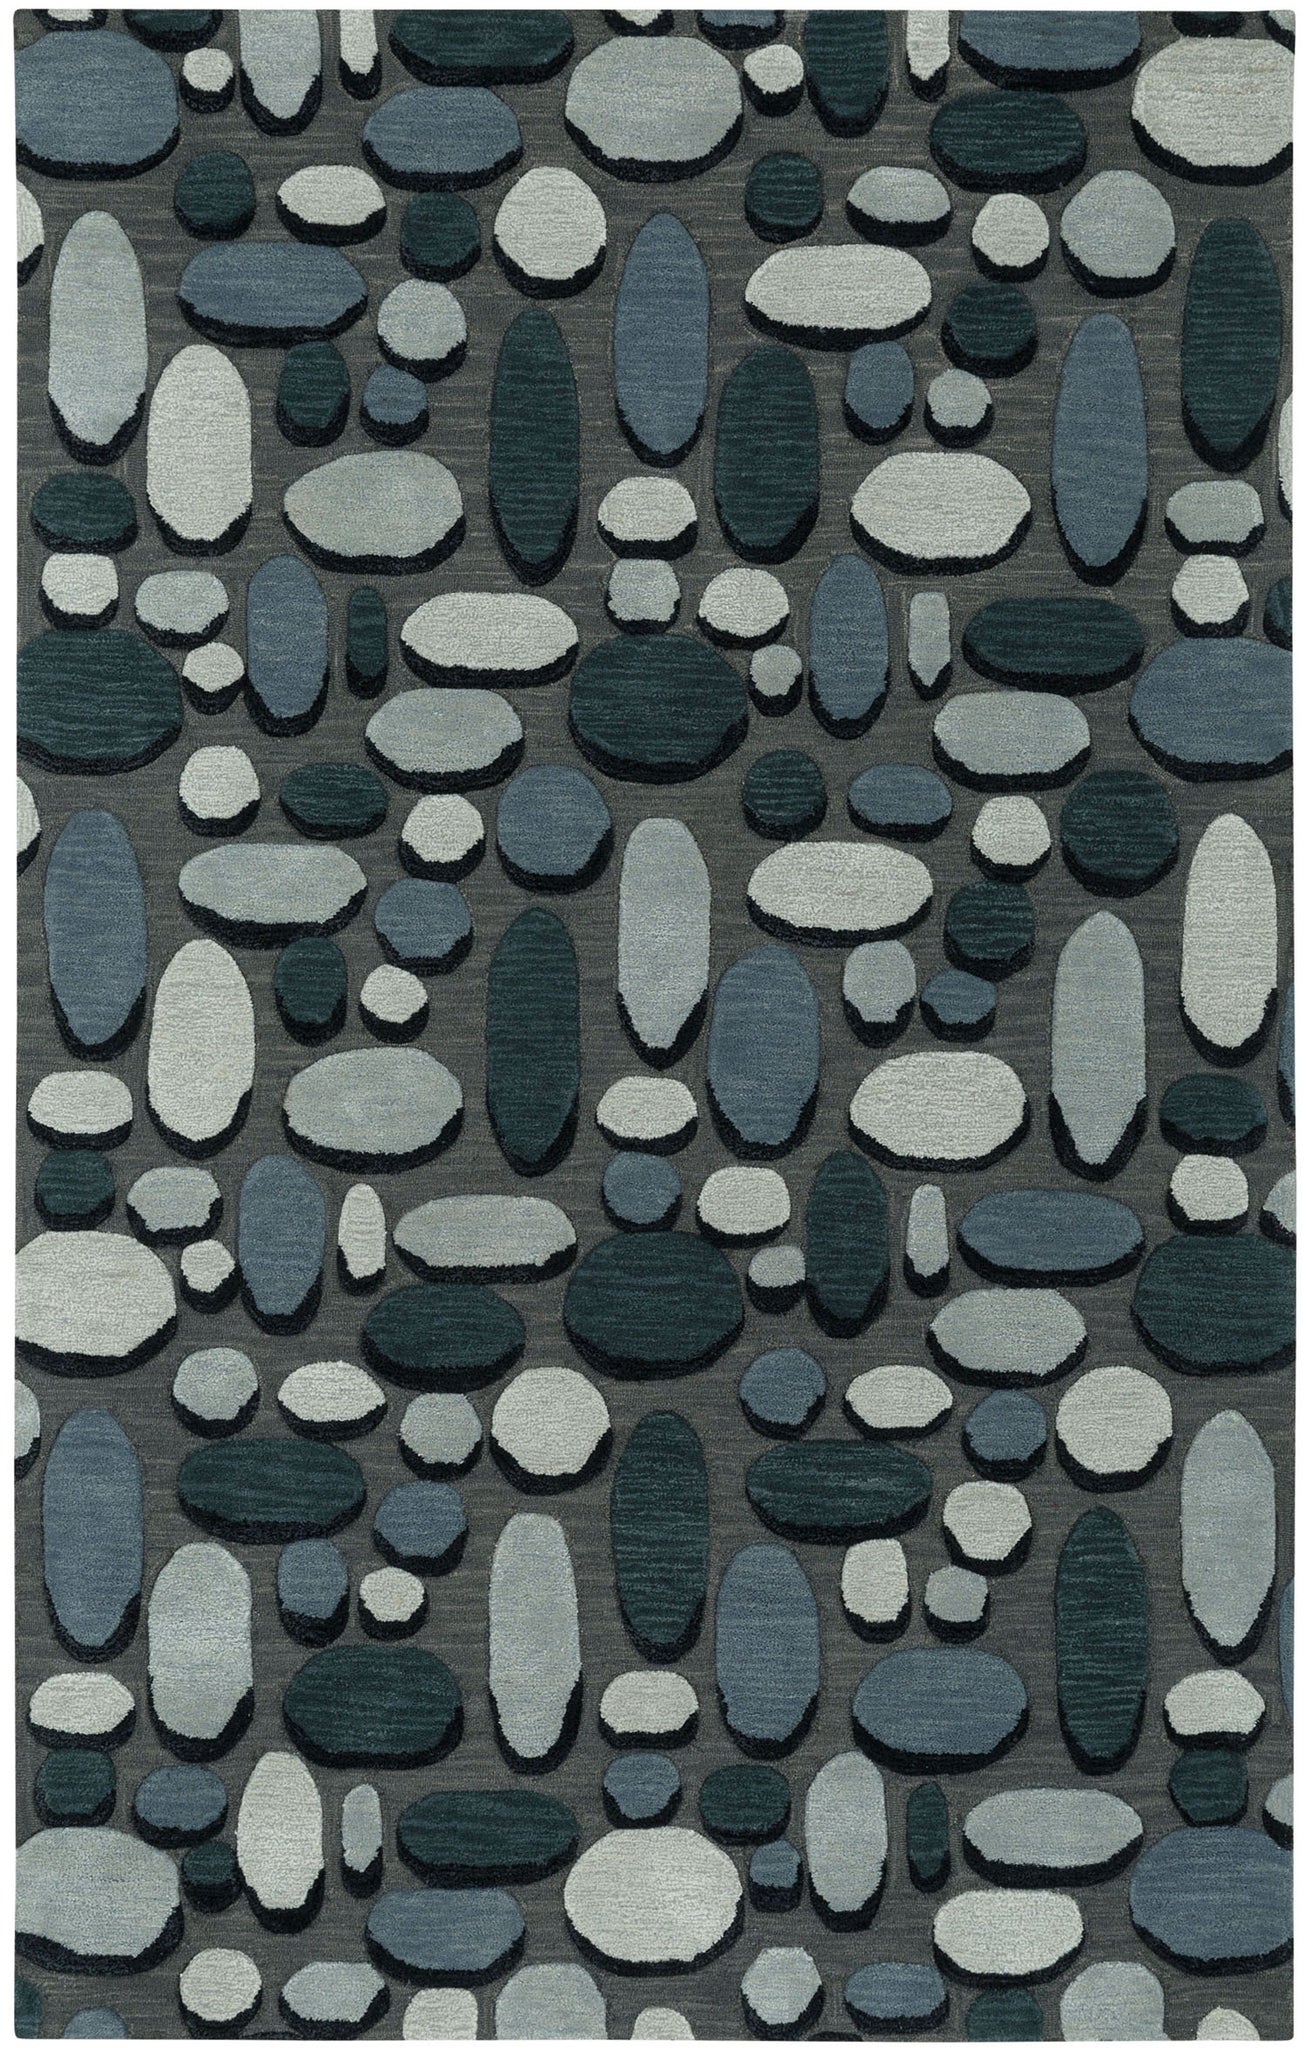 Capel Evening Shade 3295 Charcoal 330 Area Rug main image